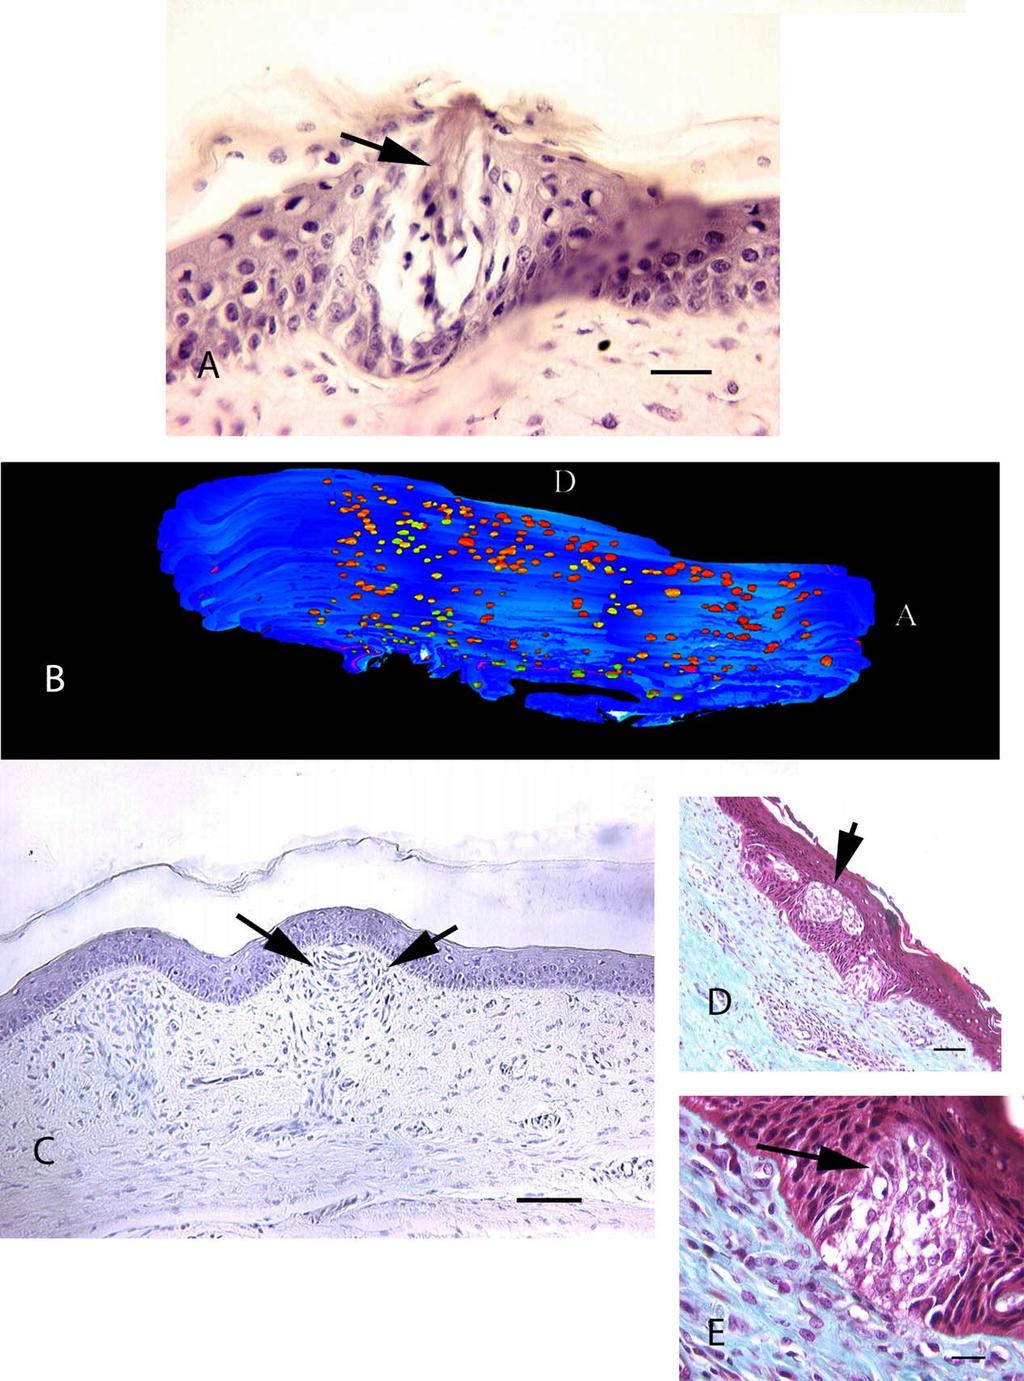 Fig. 3. Histological view of taste bud (black arrow) in the upper palate of the hatchling Alligator (A). Three-dimensional reconstruction of the neonate alligator tongue.